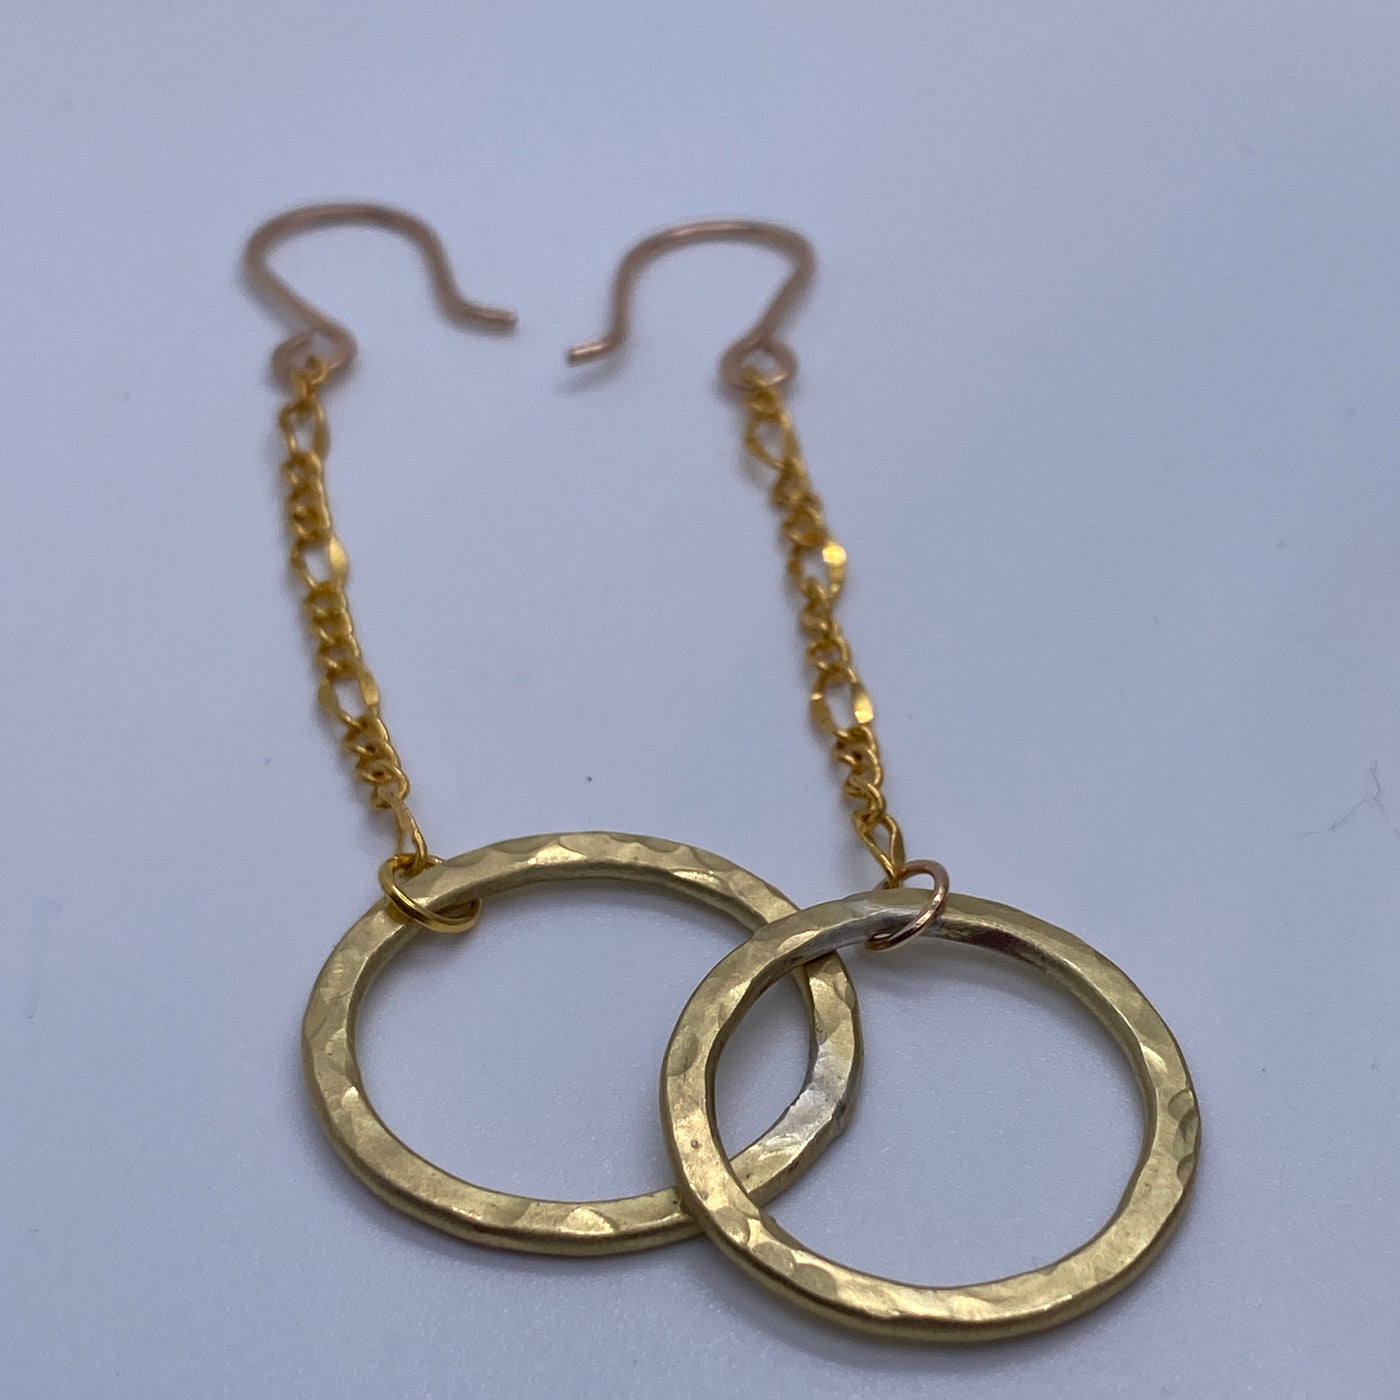 Brass circle texturized earrings on chain